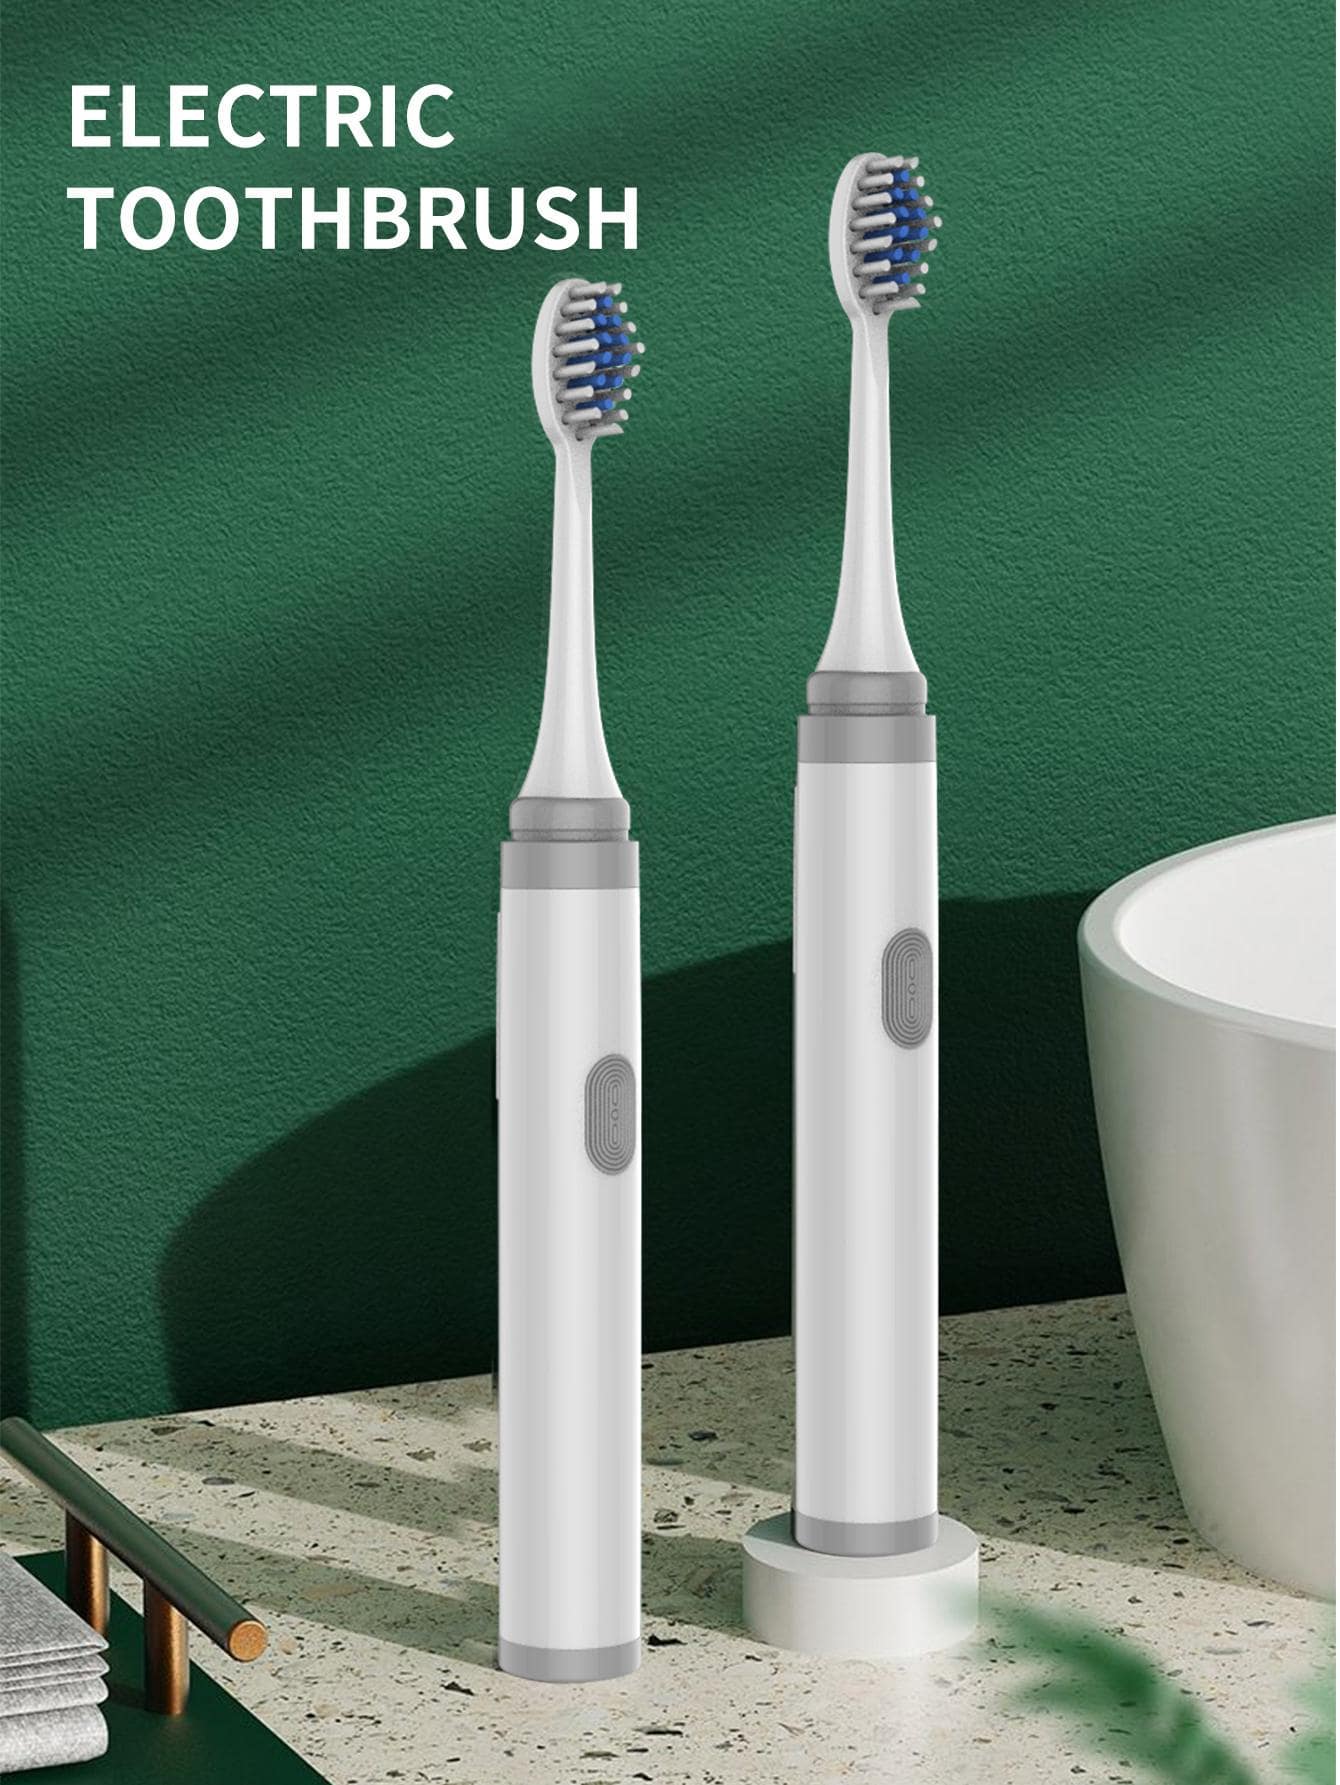 1pc PP Electric Toothbrush With 3pcs Toothbrush Head, Simple White Soft Waterproof Automatic Toothbrush For Bathroom